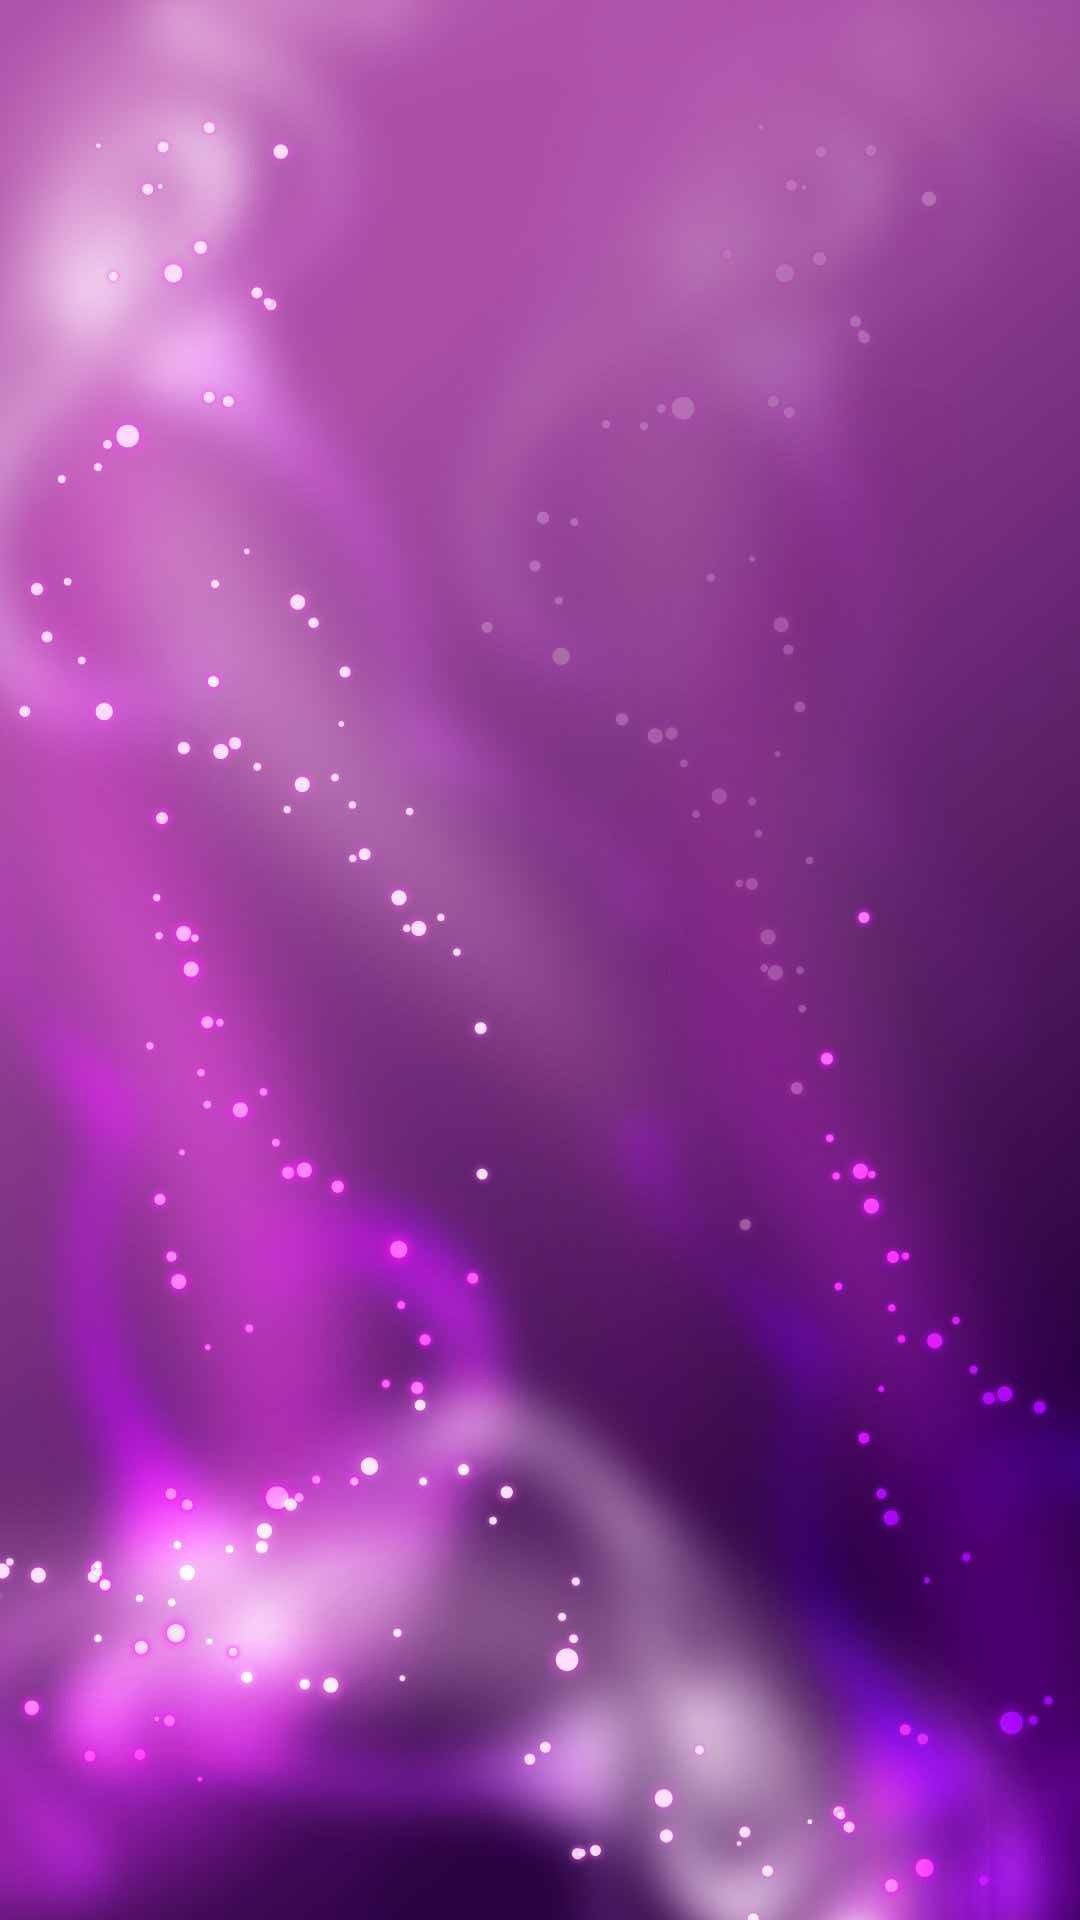 Purple Picture Hupages Download iPhone Wallpaper in 2020